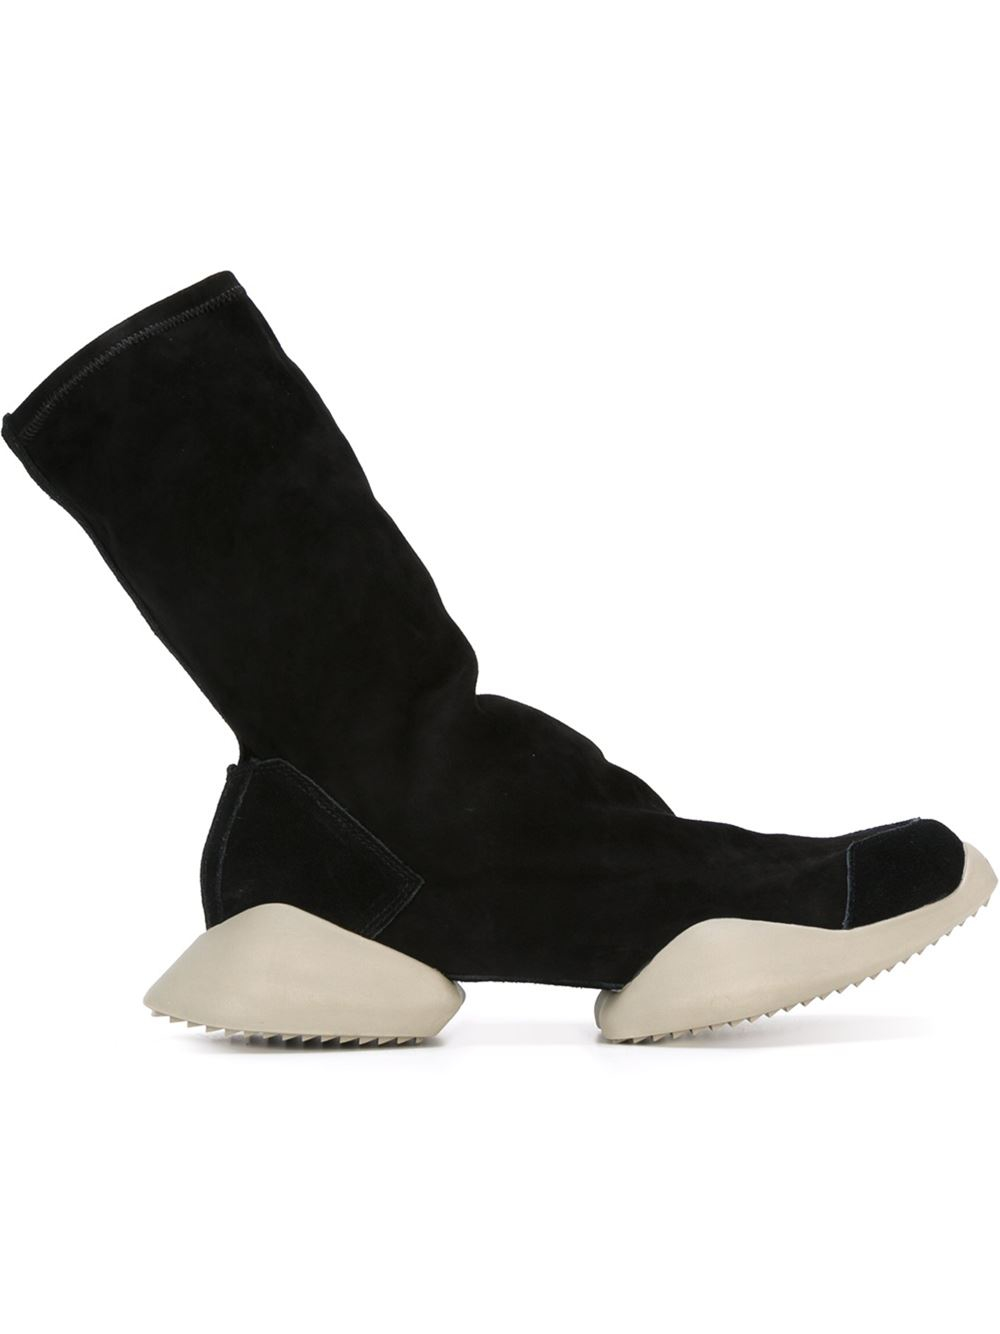 Rick Owens ' X Adidas Runner' Boots in Black for Men | Lyst